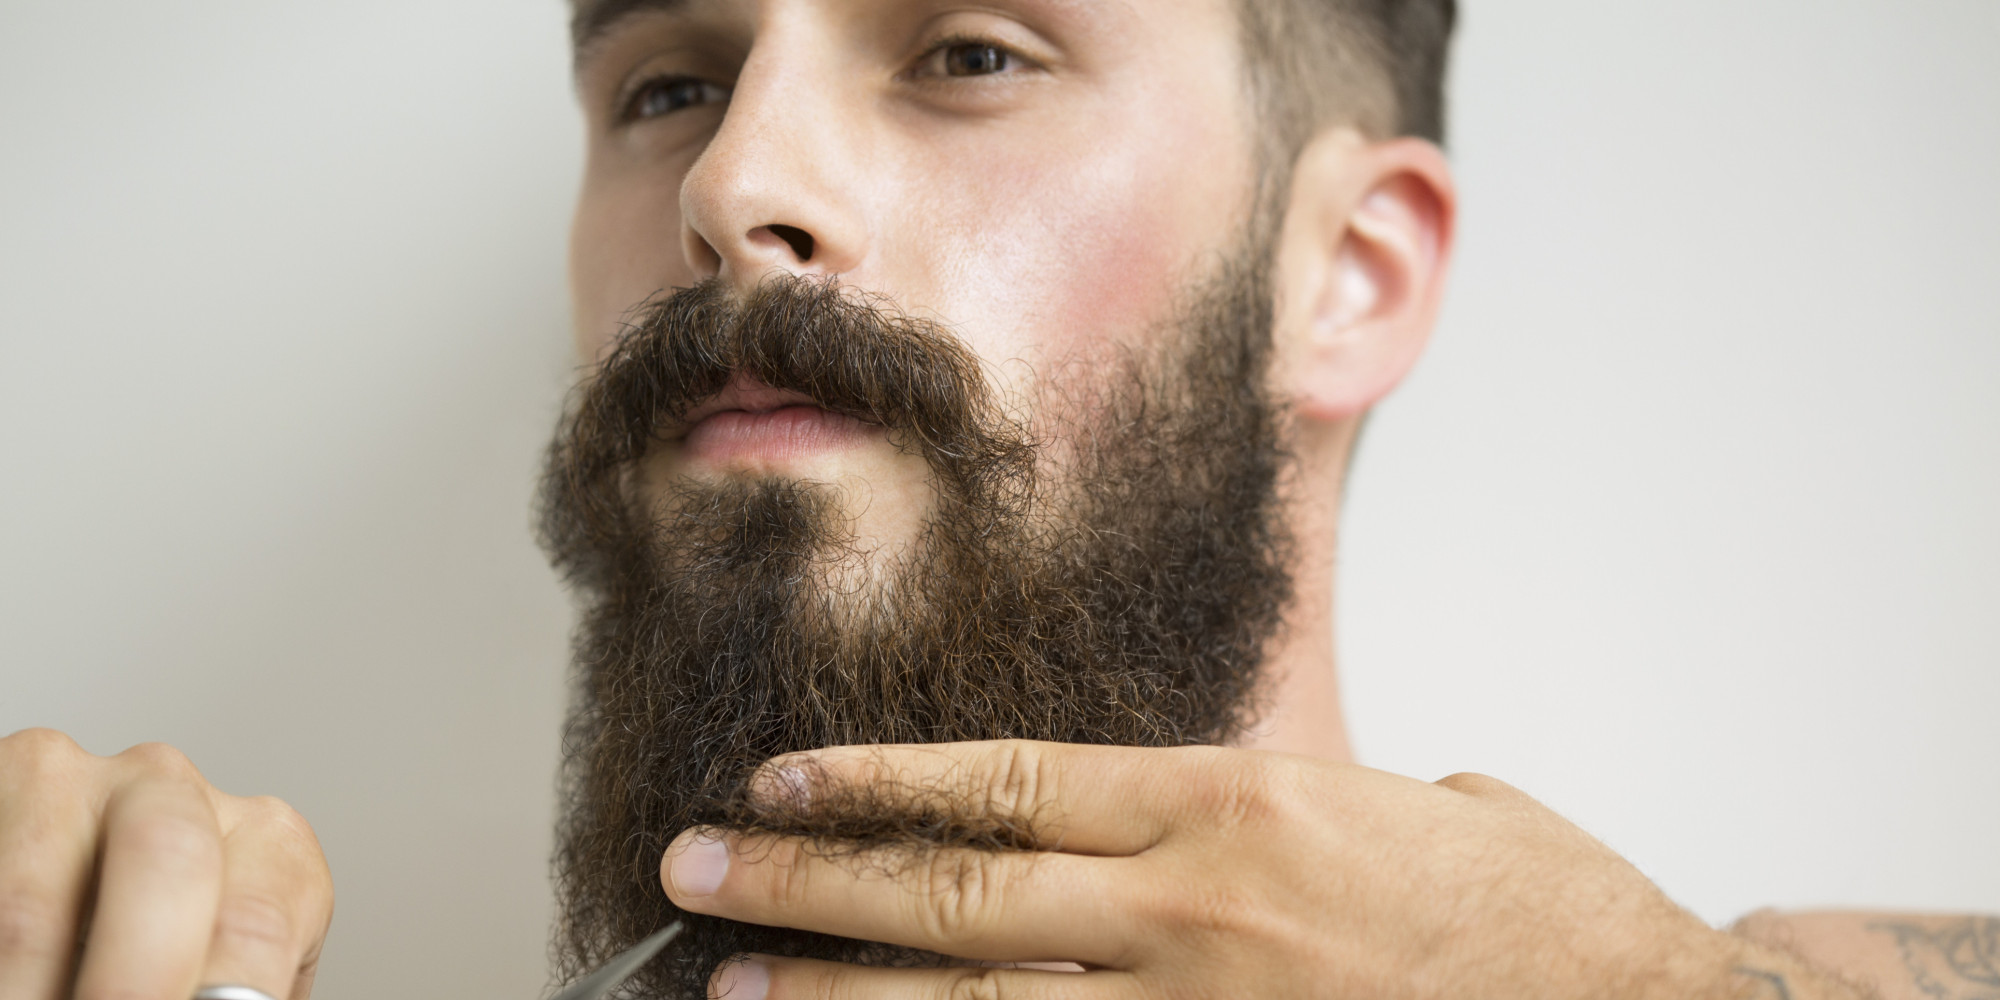 9. "How to maintain and care for long blonde hair in a lumbersexual style" - wide 3